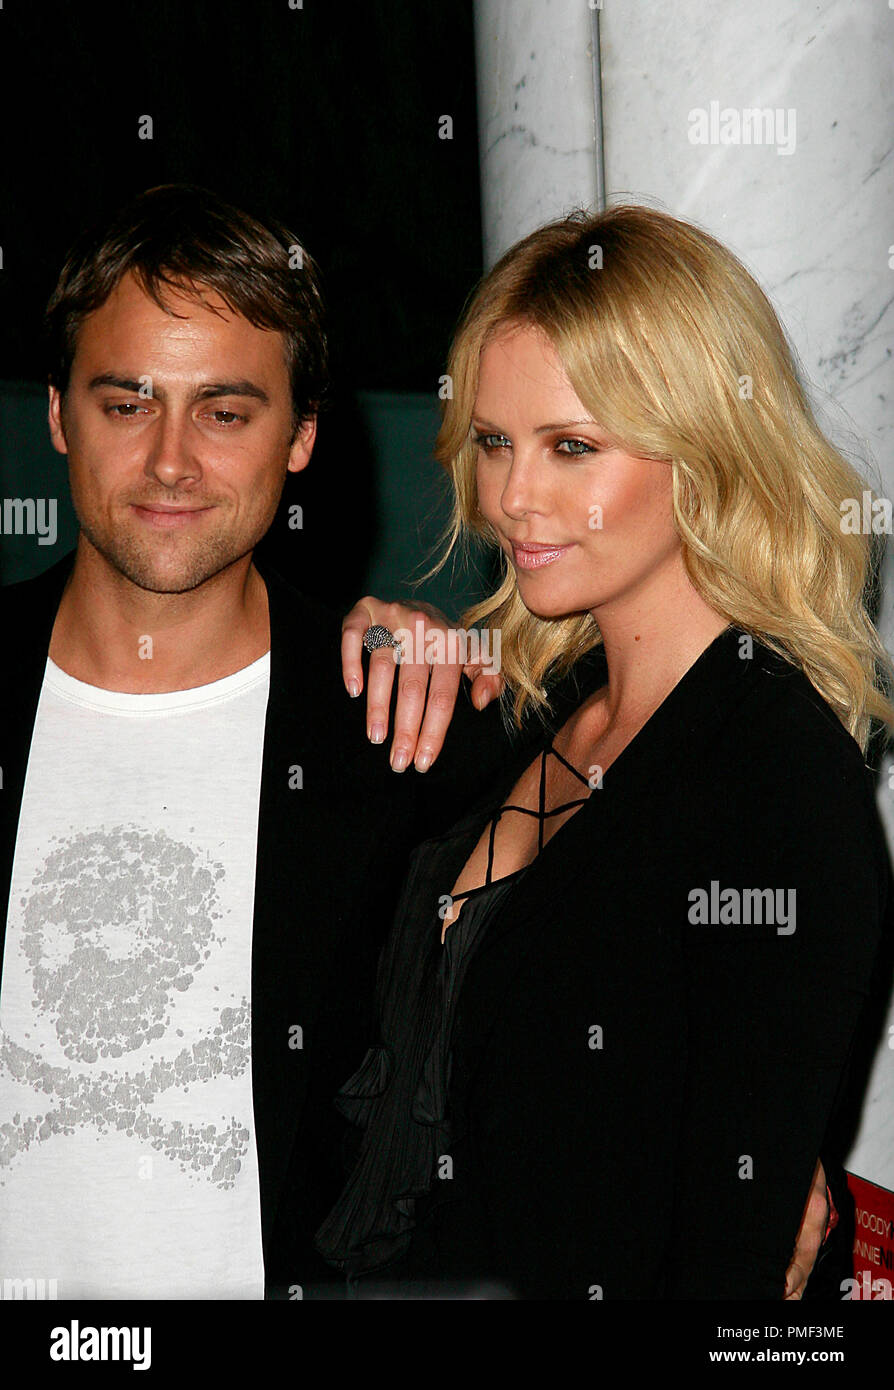 Battle in Seattle Premiere  Director Stuart Townsend, Charlize Theron 9-22-2008 / Clarity Theater / Beverly Hills, CA / Redwood Palms Pictures / Photo by Joseph Martinez File Reference # 23616 0019PLX   For Editorial Use Only -  All Rights Reserved Stock Photo